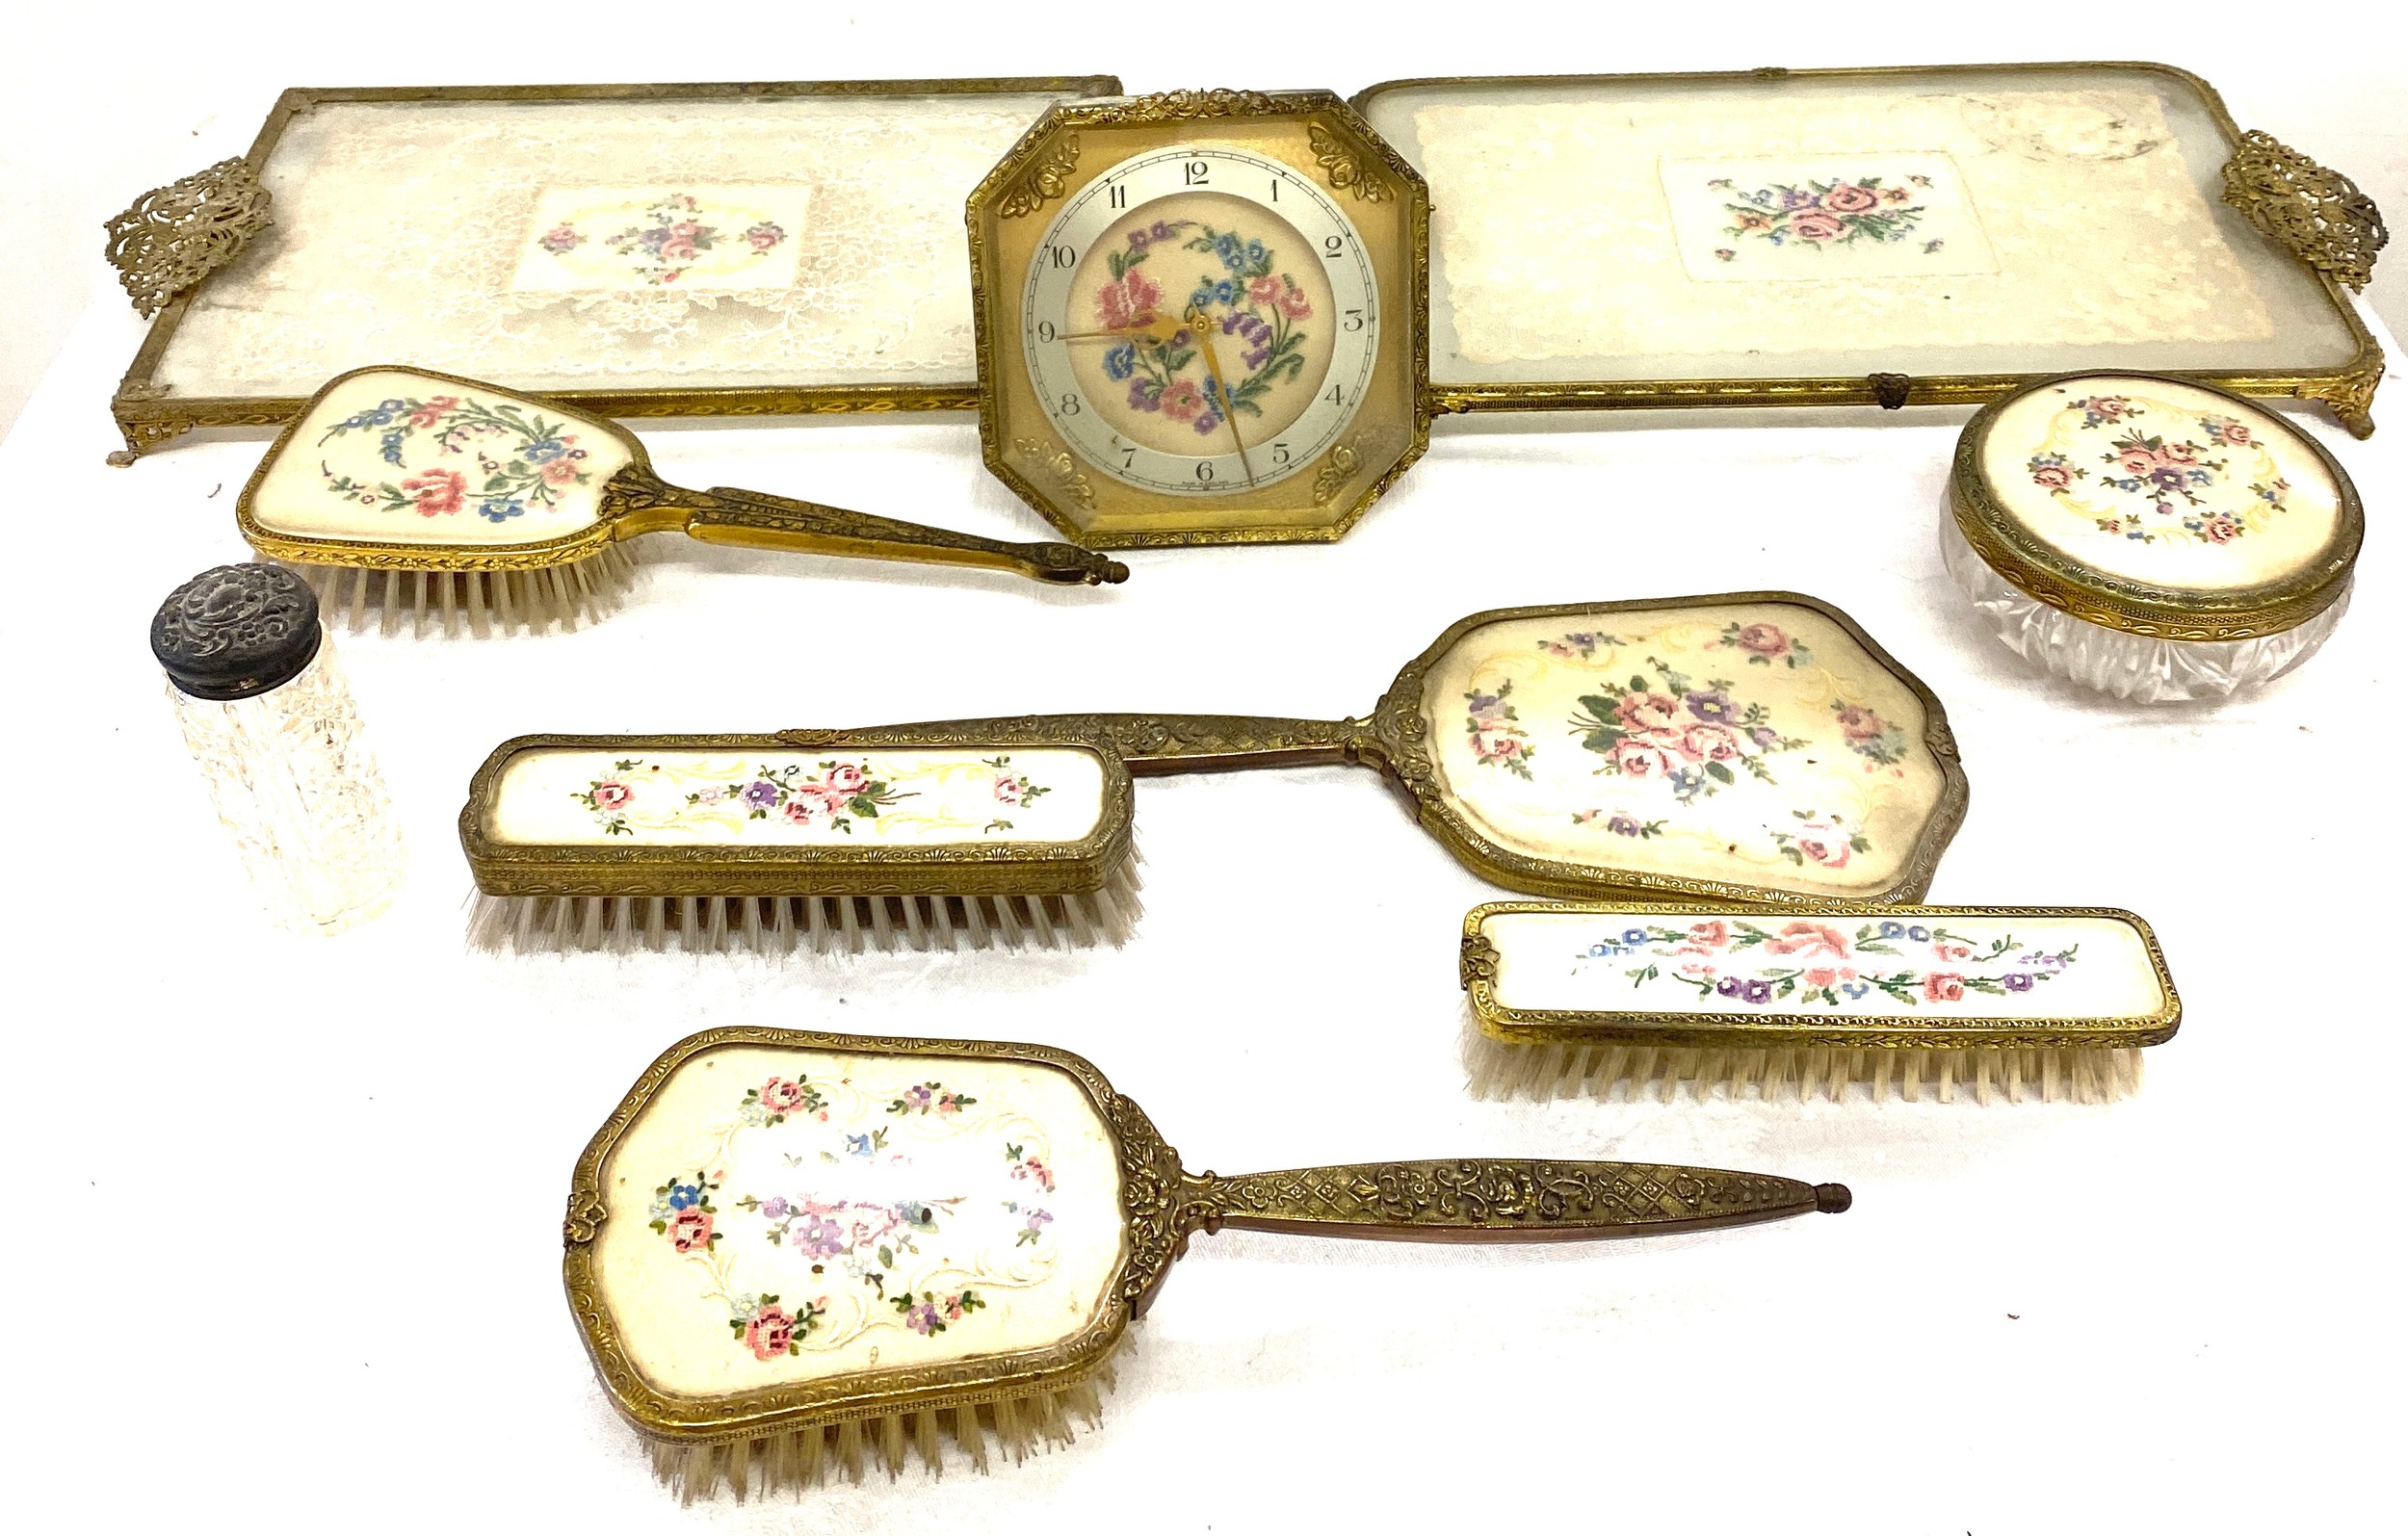 Vintage dressing table set with clock, brushes, tray etc